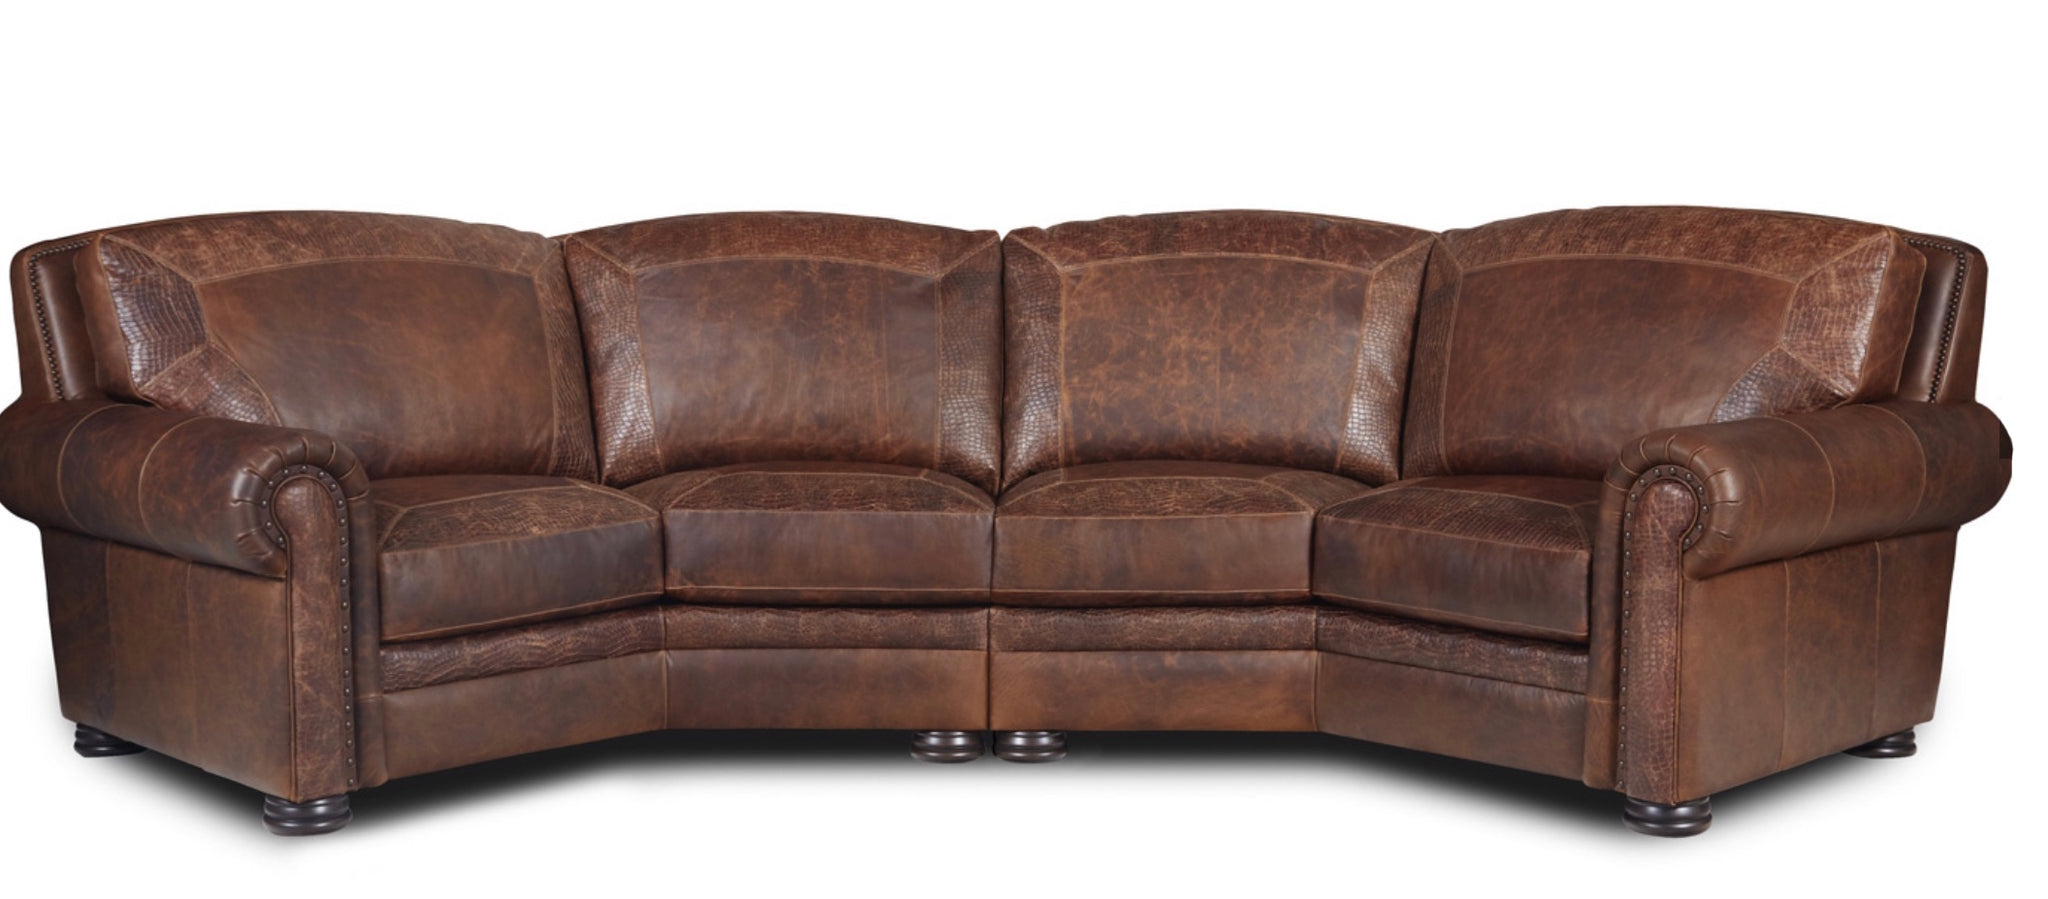 curved western leather sofa